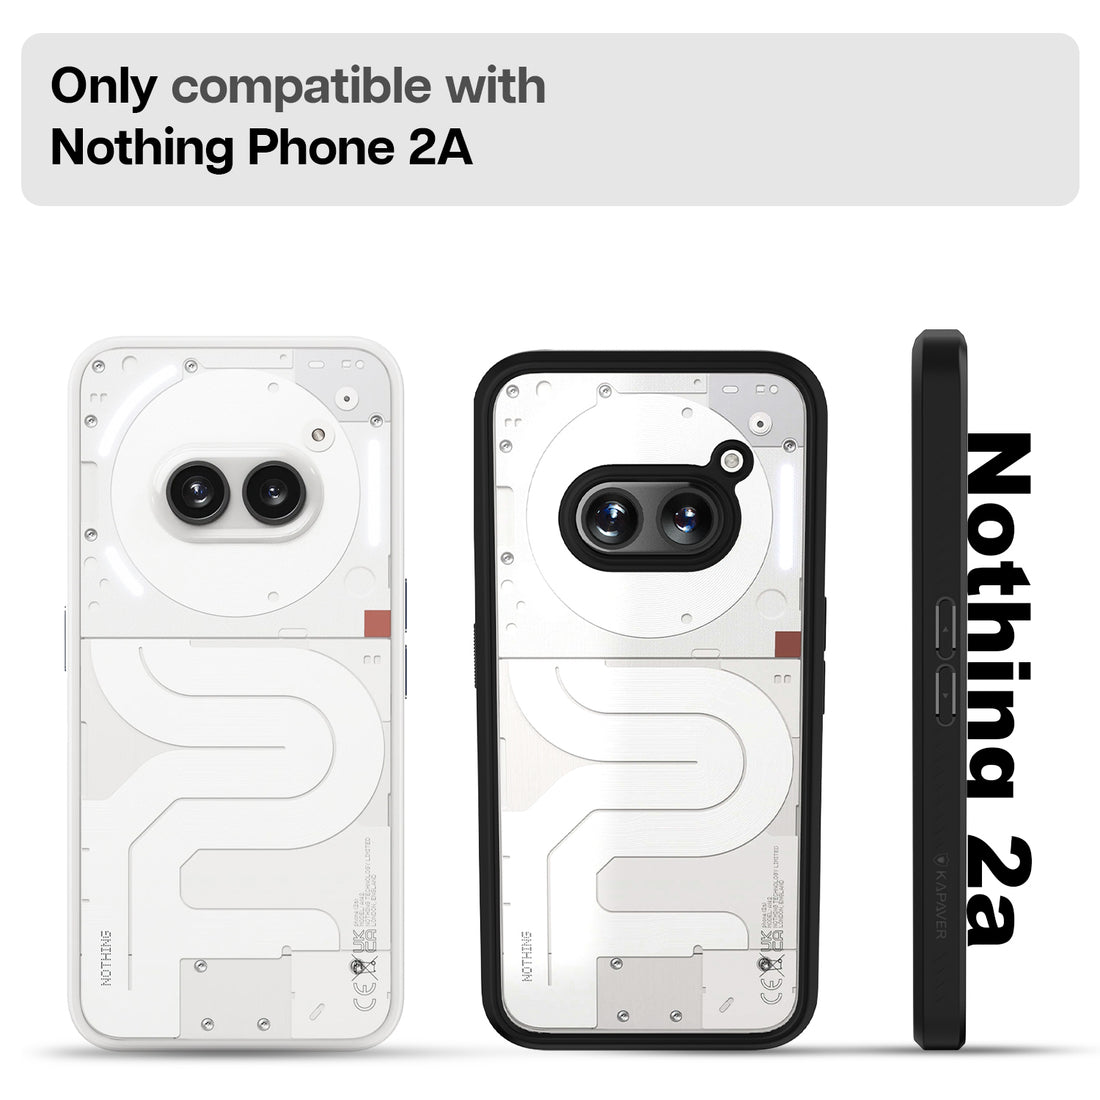 Nothing Phone 2a Back Cover Case | Impulse - Black